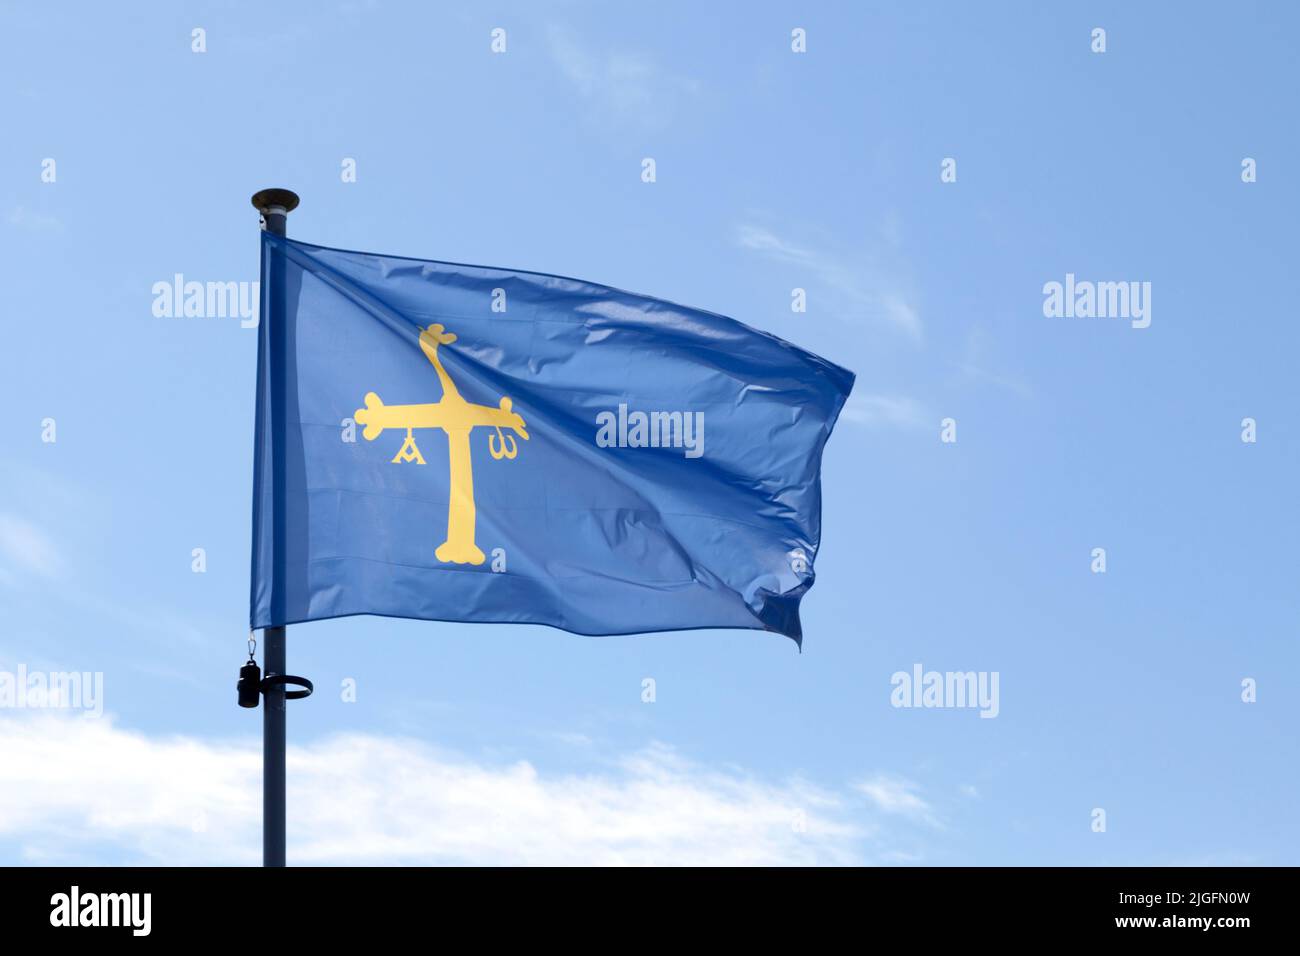 Flag of Asturias (Victory Cross) waving atop of its pole against a blue sky. Stock Photo